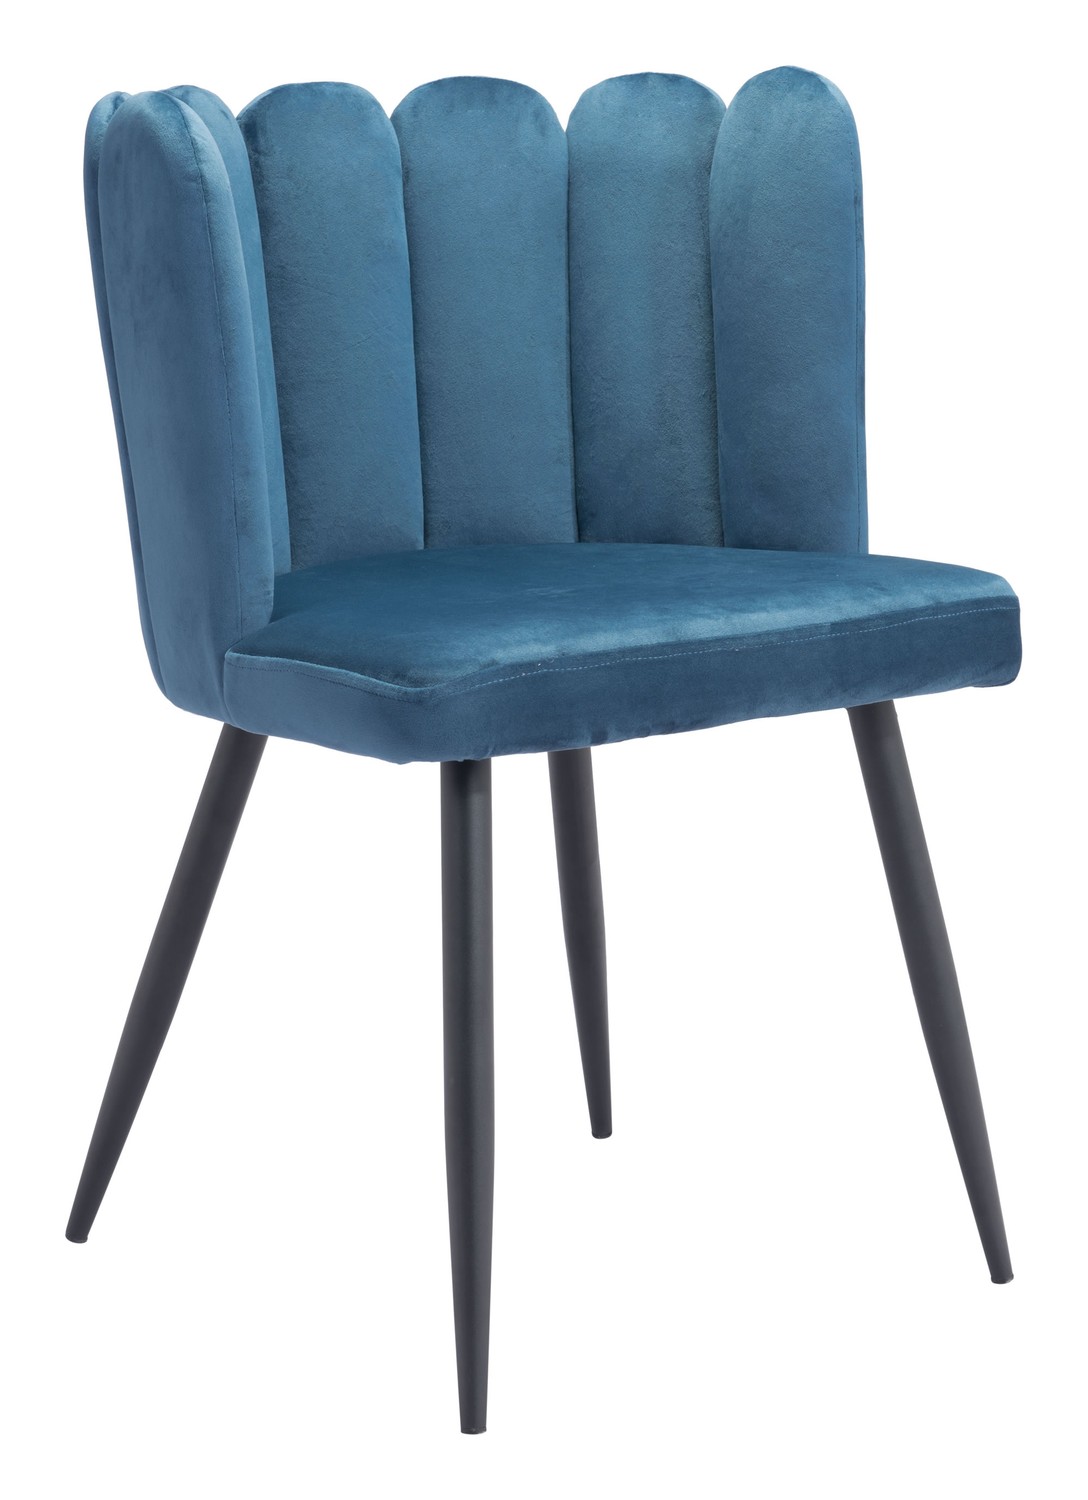 22" x 22" x 31.5" Steel Blue Velvet Steel and Plywood Chair Set of 2